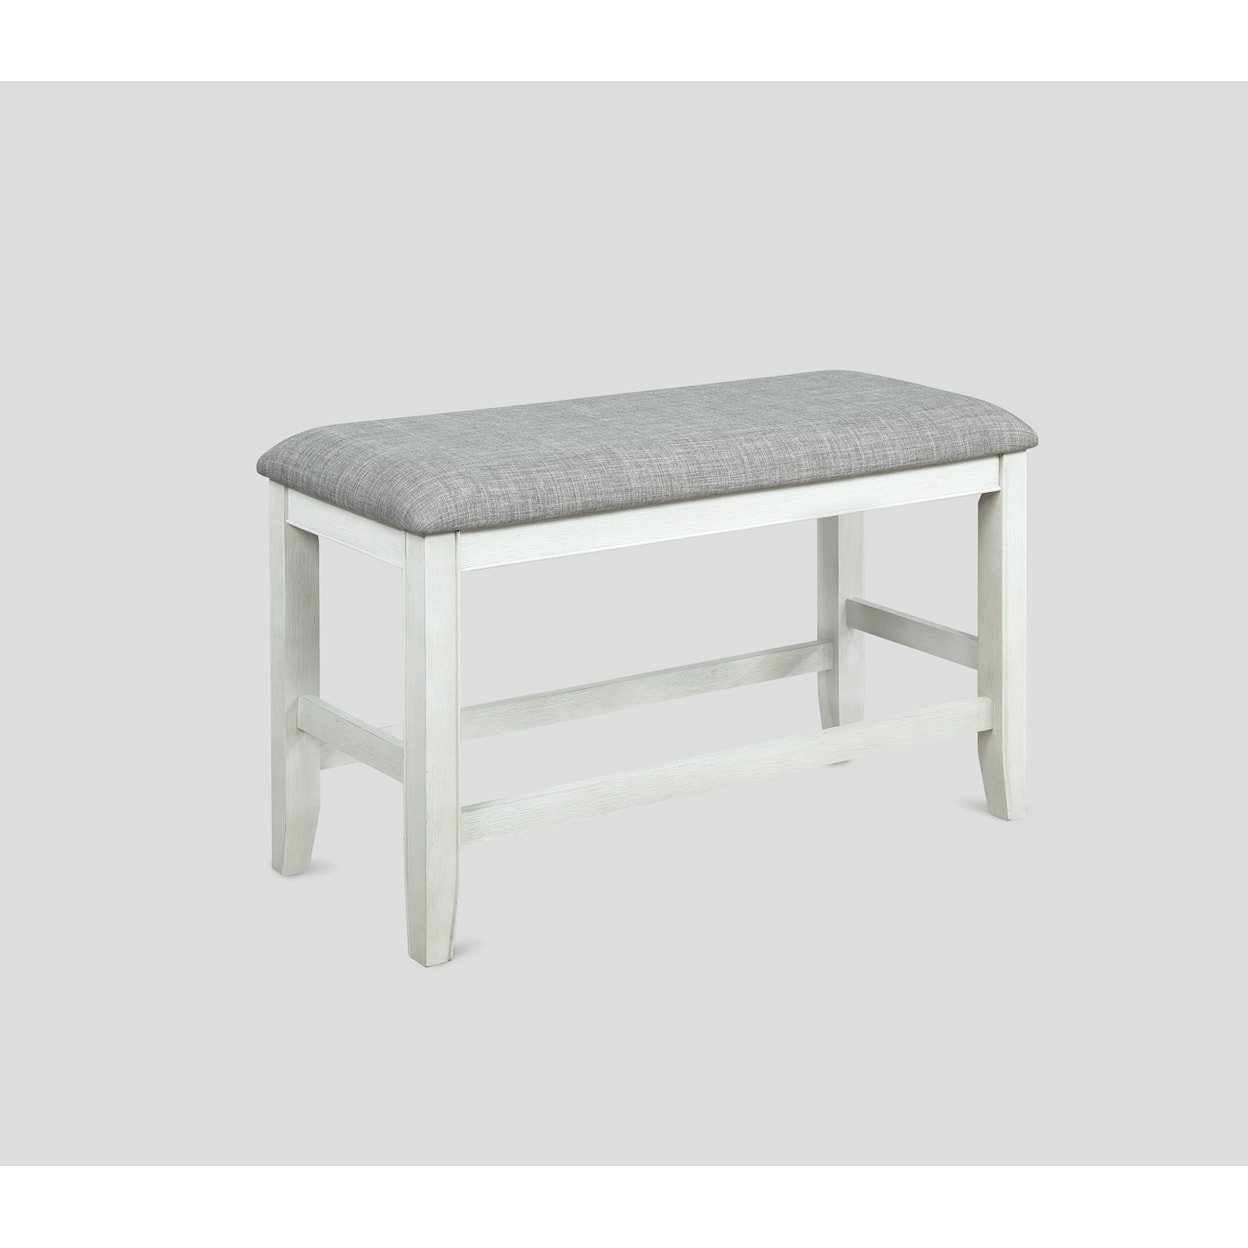 CM Fulton Counter Height Bench